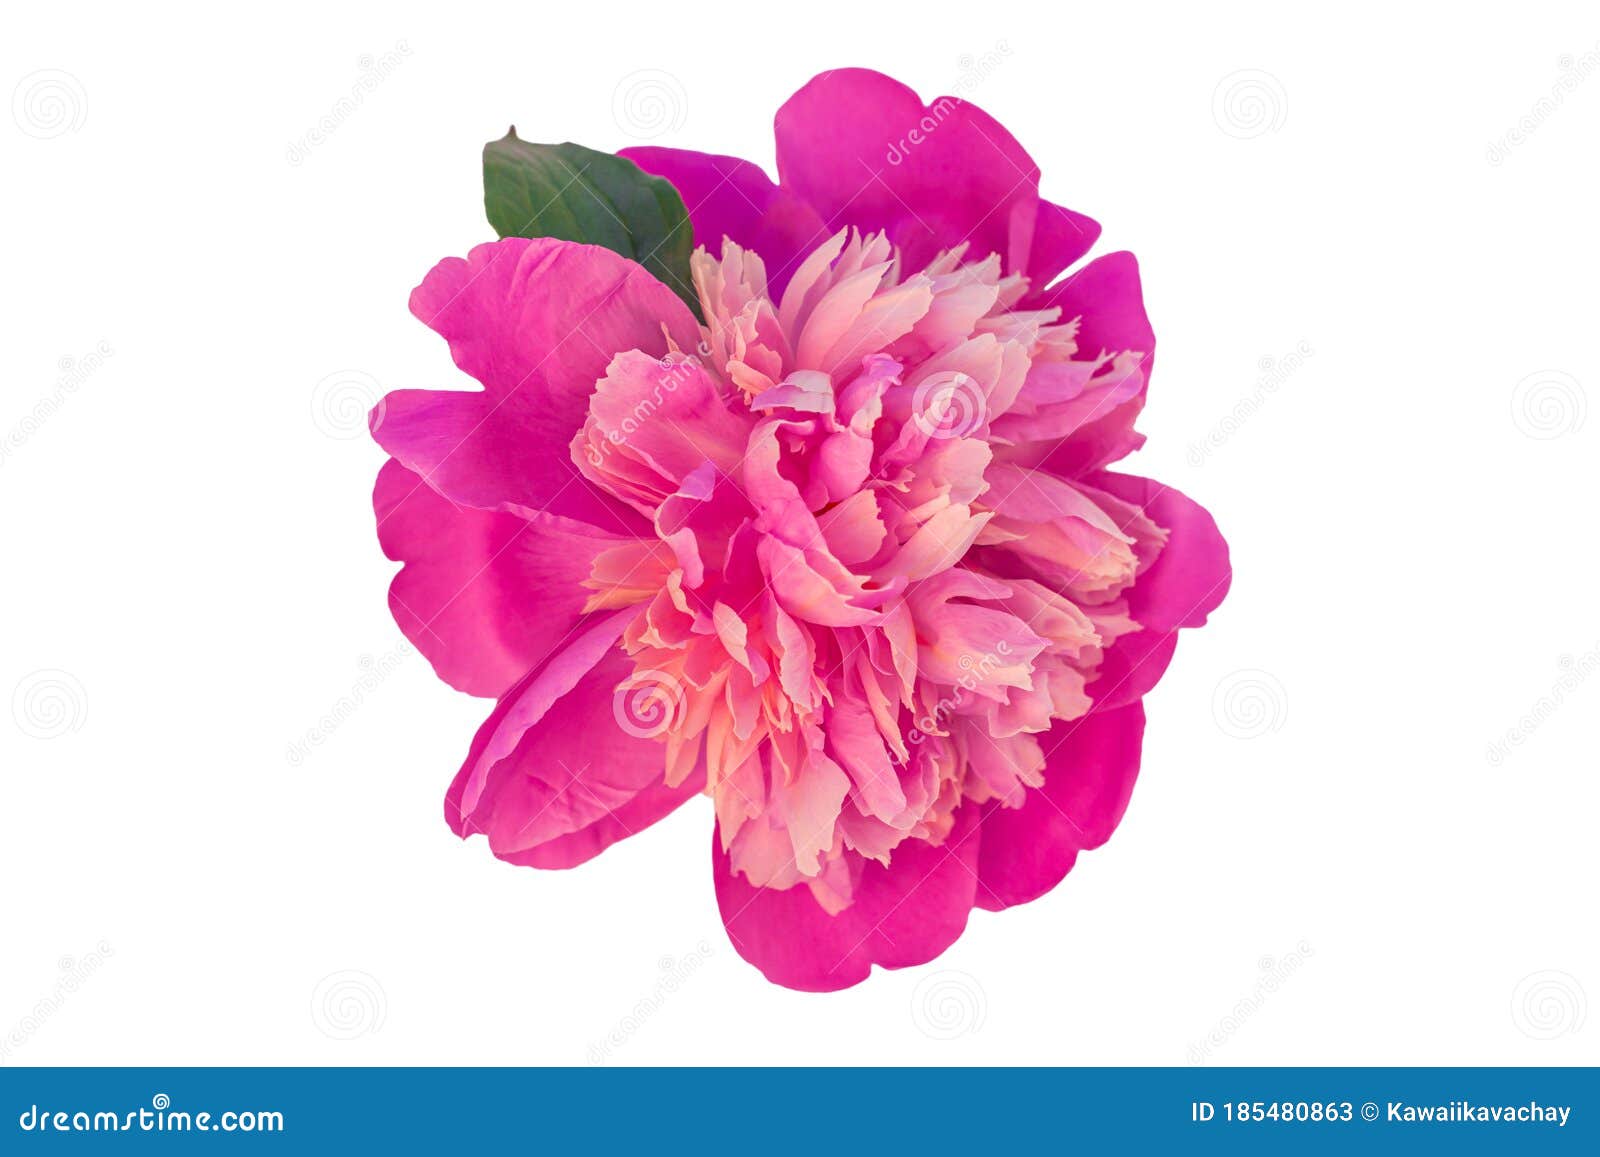 Peony Single Flower Isolated On White Background Beautiful Blooming Flowers Clipart For Floral Design Pattern Rose Plant Stock Image Image Of Colour Beauty 185480863